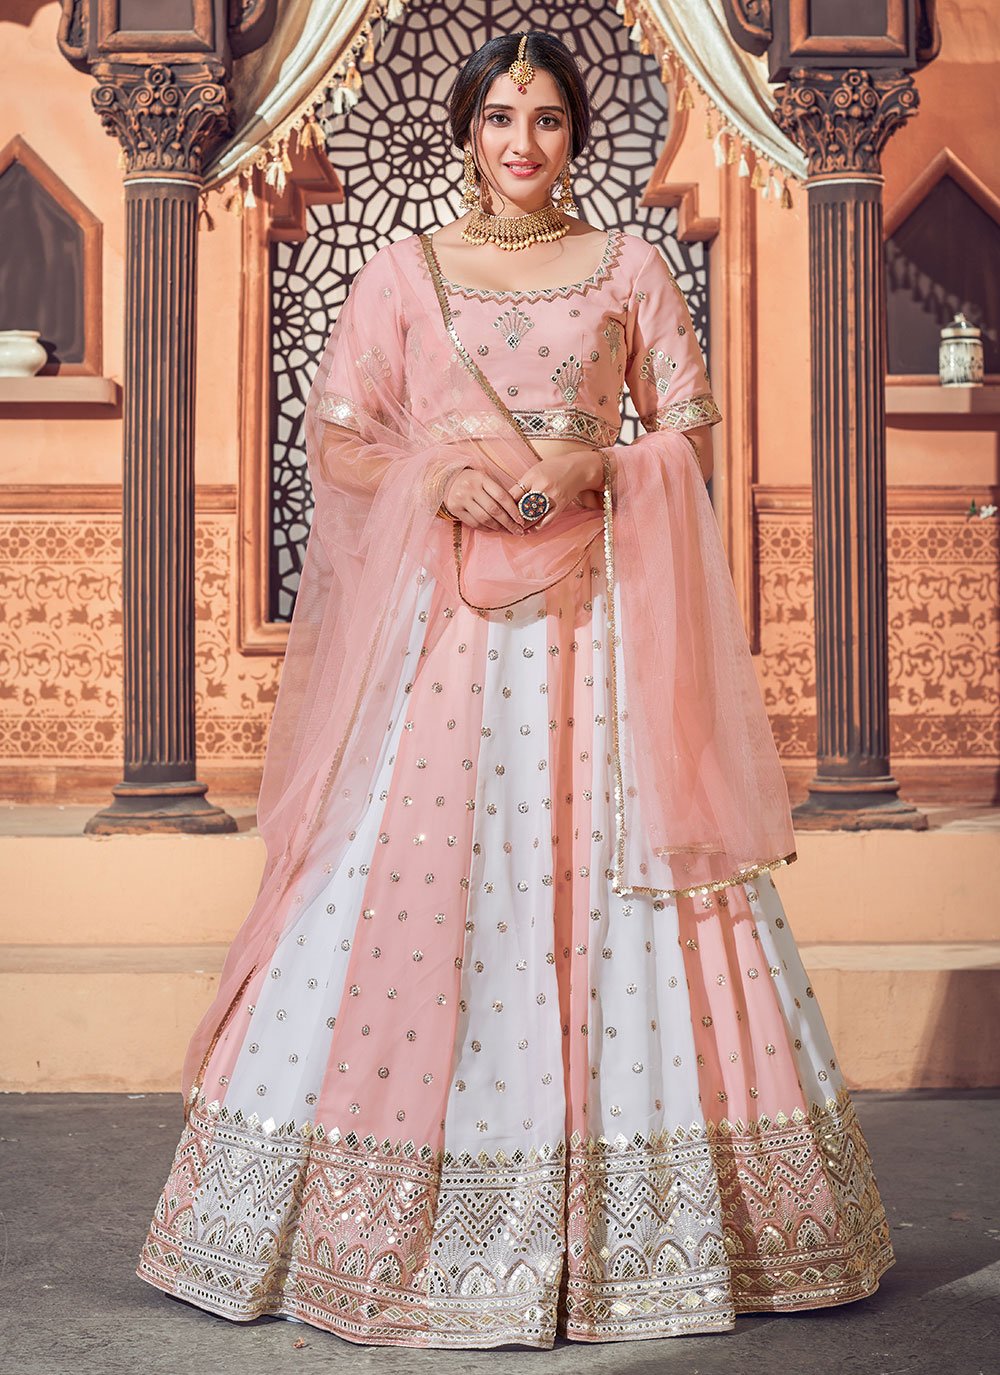 Off White and Pink Lehenga Choli in Faux Georgette with Embroidered